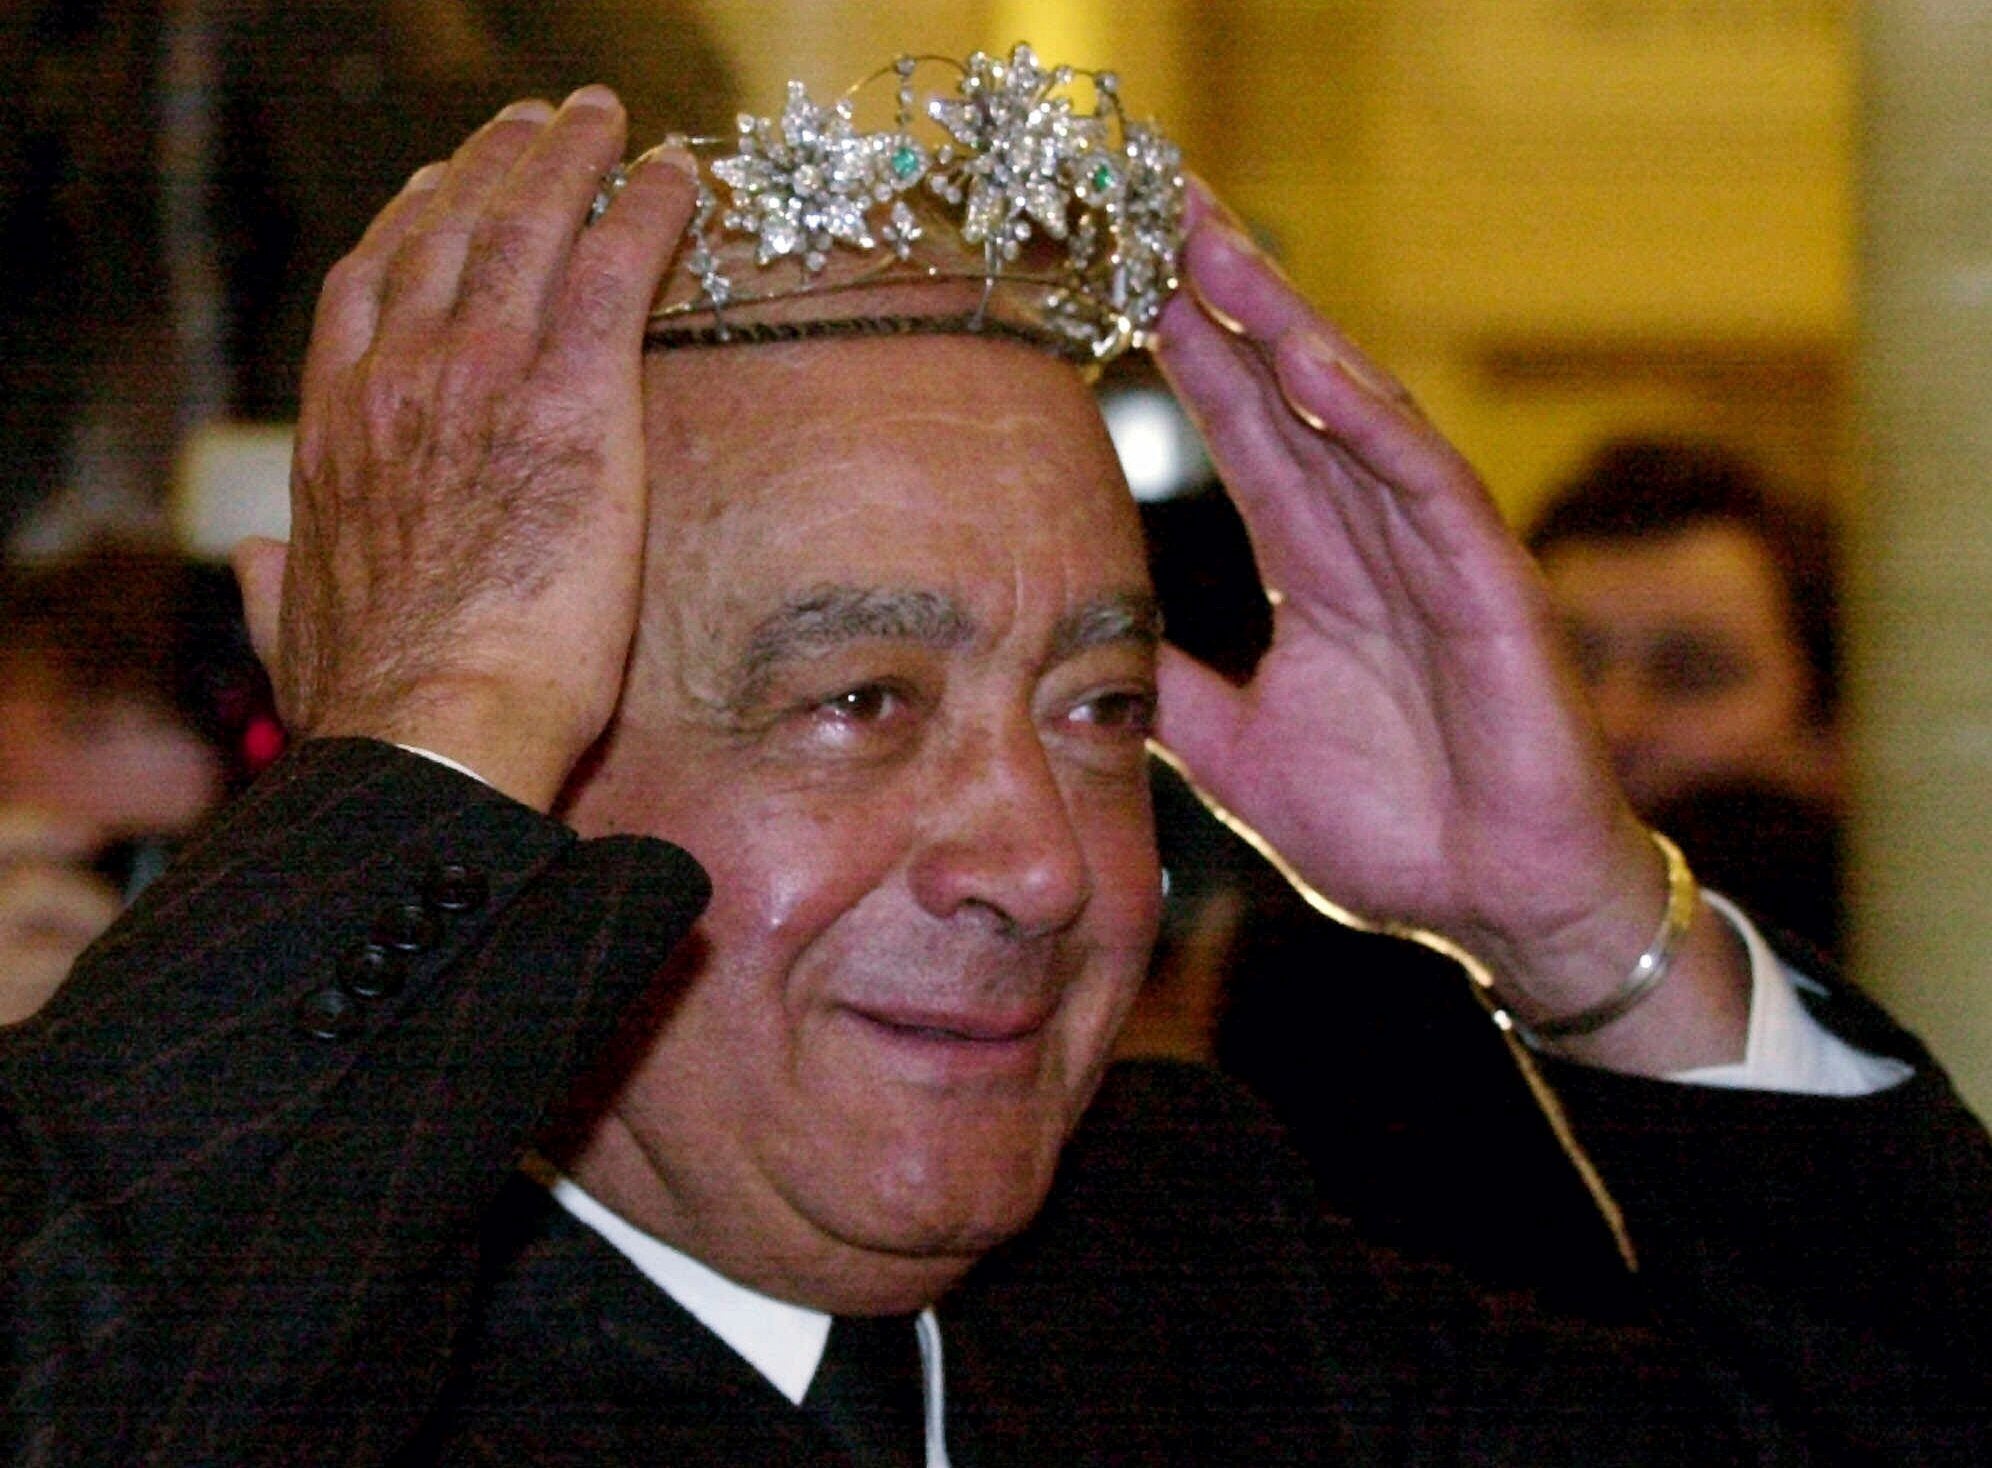 Mohamed Al-Fayed owner of Harrods department store, in London, tries on a tiara at the start of the January sales in January 2001